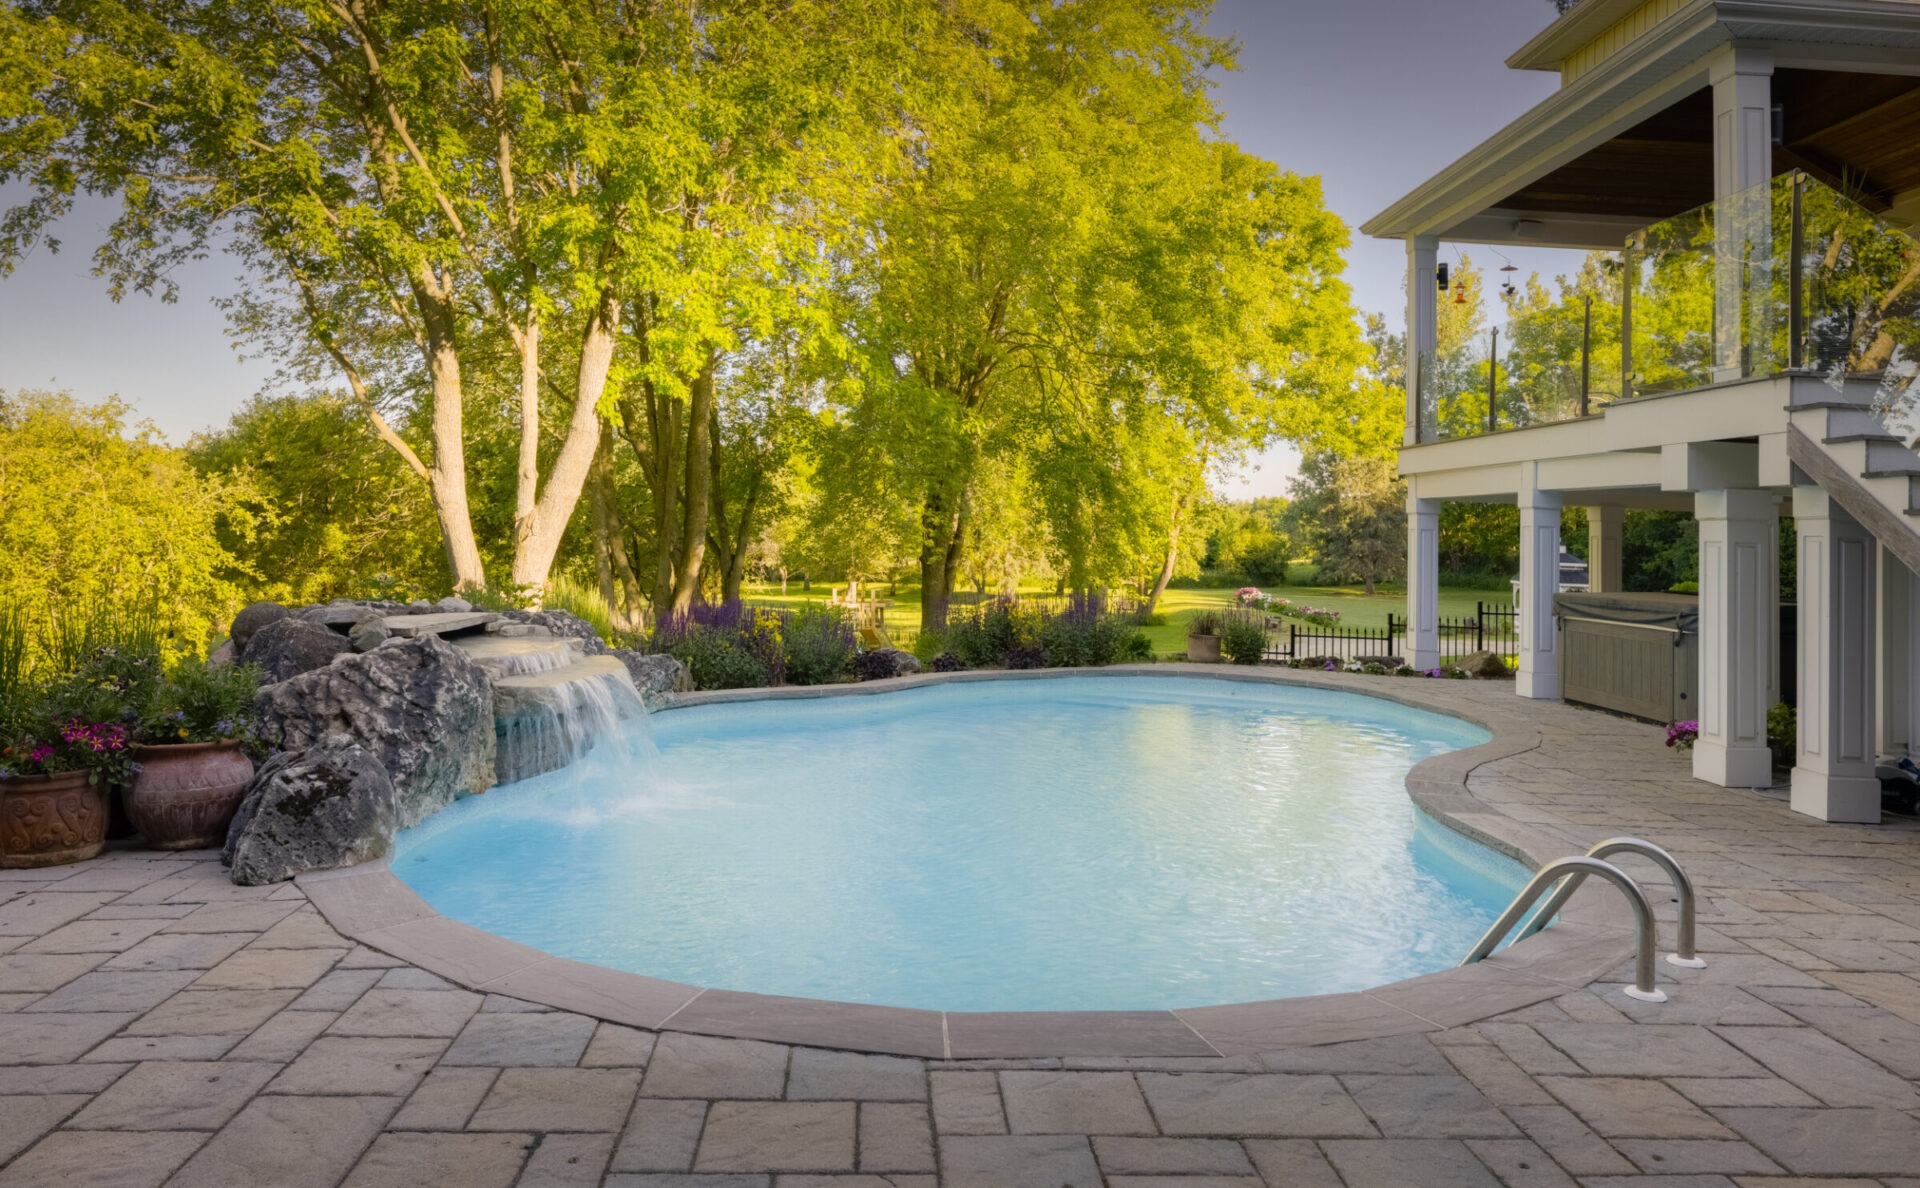 An idyllic backyard with a curved swimming pool, artificial waterfall, paver patio, and greenery under a clear sky, adjacent to a two-story house with porches.